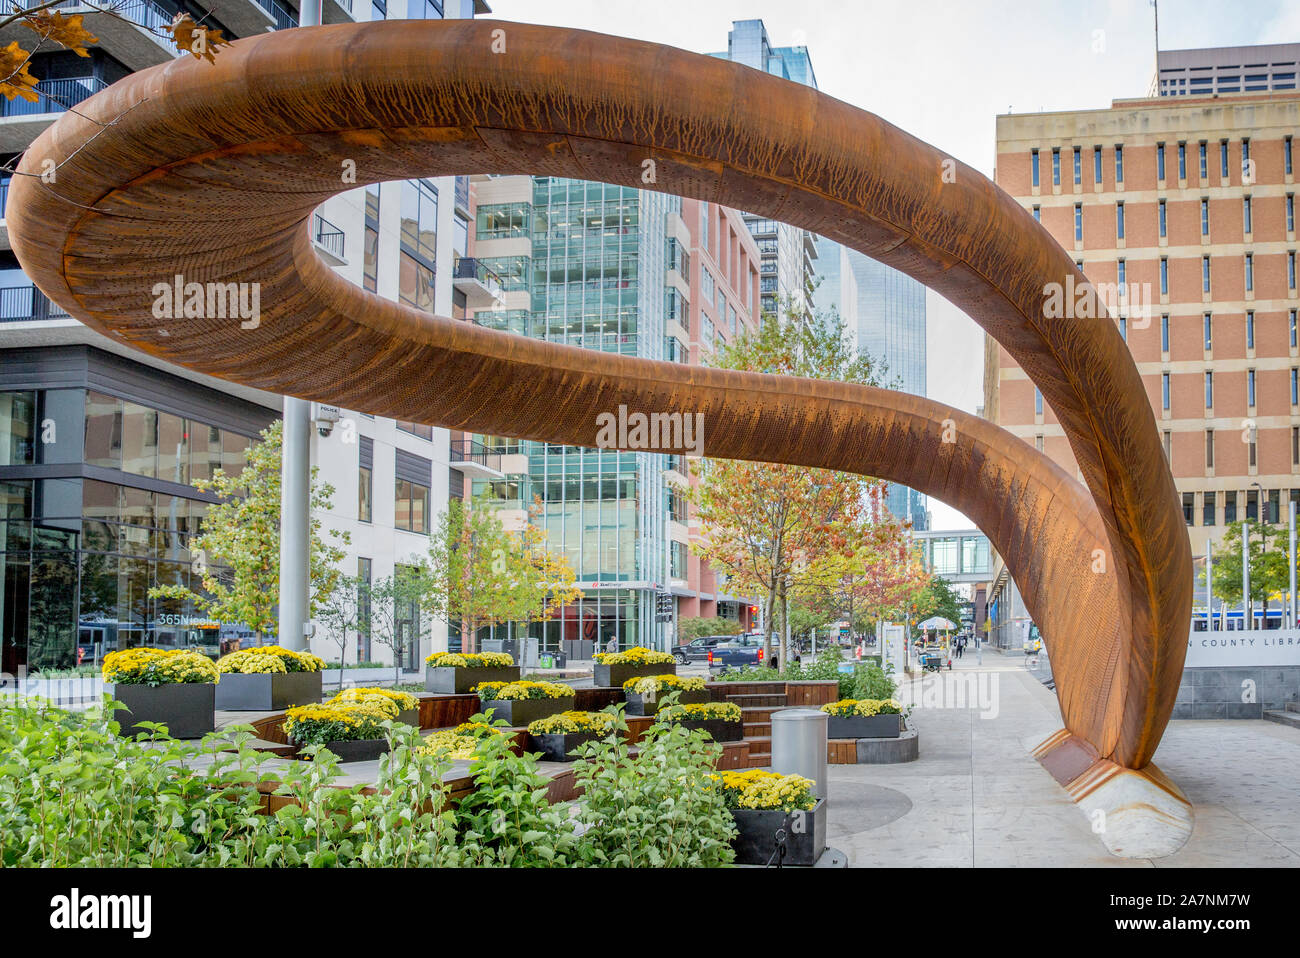 The 10-ton sculpture called Nimbus by Tristan Al-Haddad is outside the Hennepin County Central Library in downtown Minneapolis, Minnesota.  It is cons Stock Photo